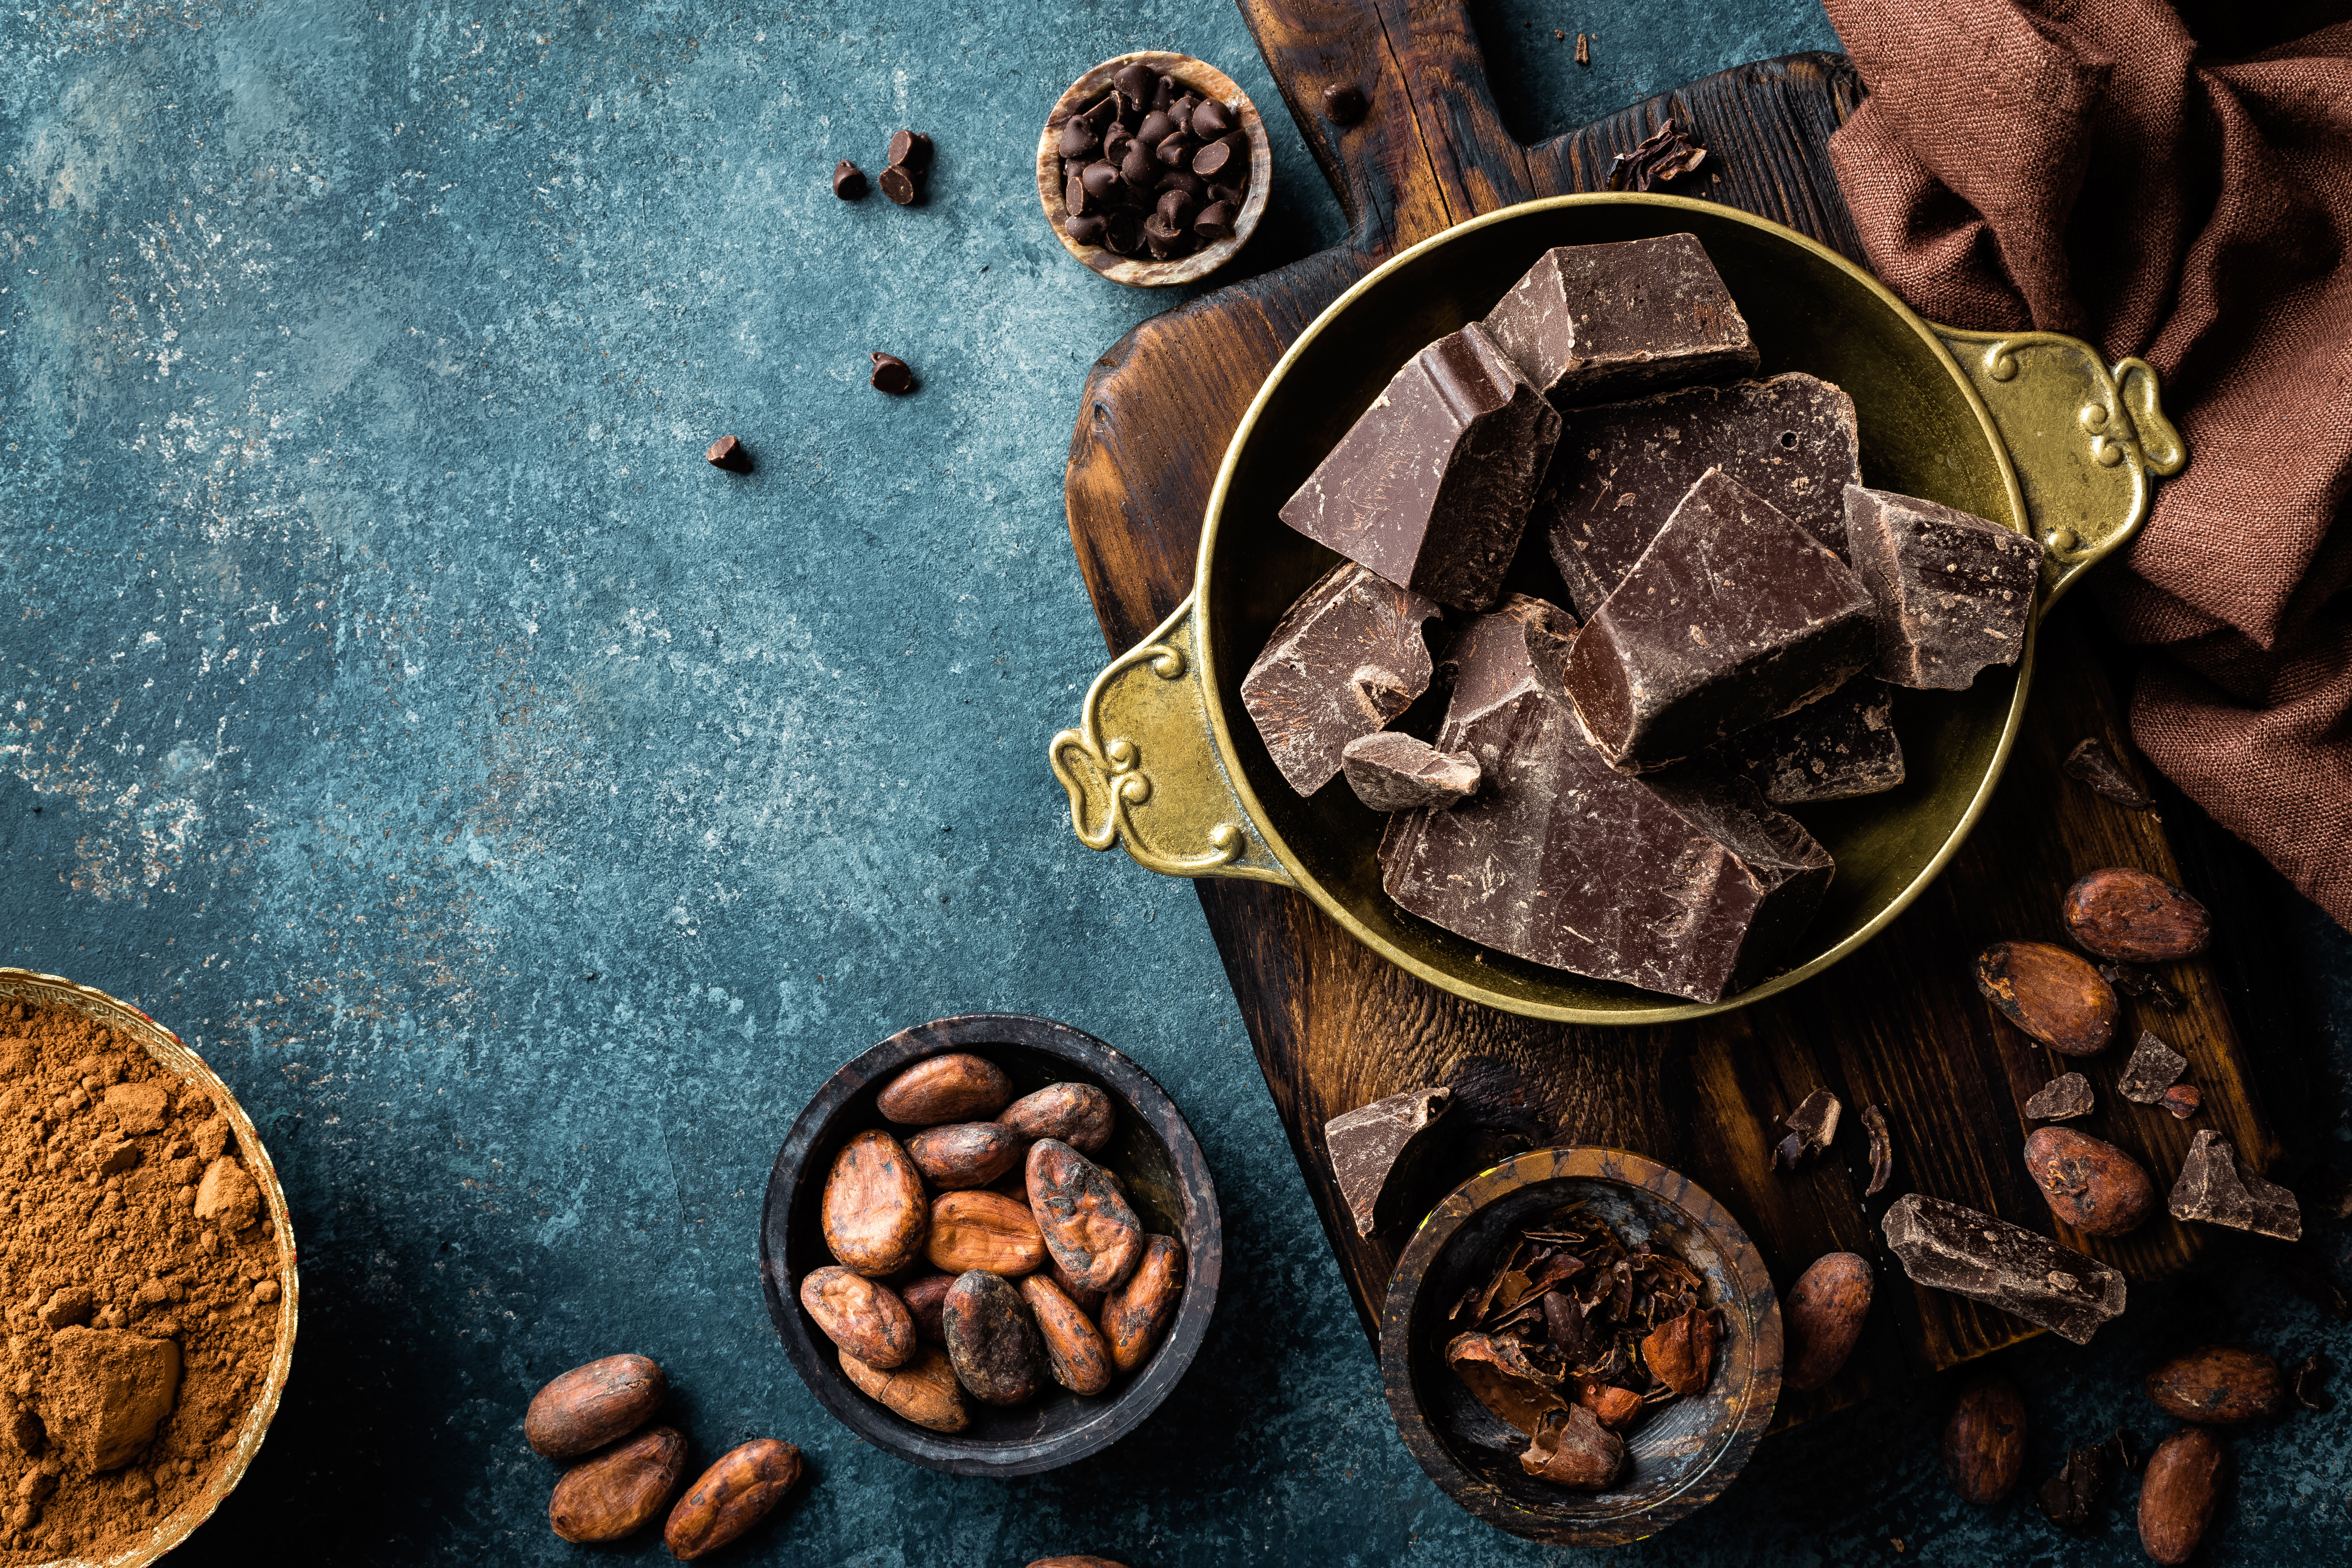 Enticing dark chocolate that could help promote longevity.